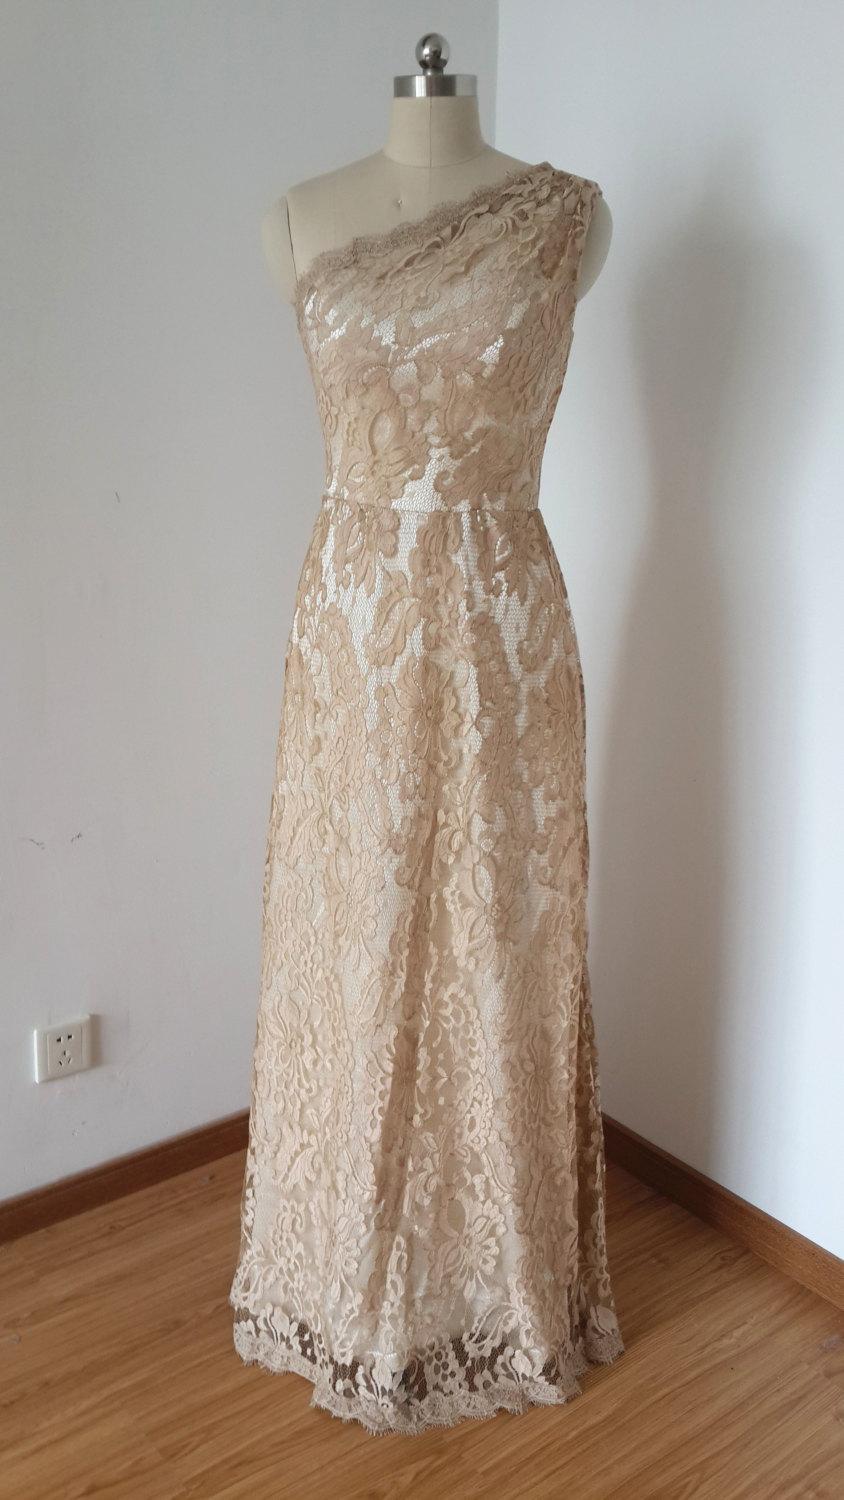 Mariage - 2015 One-shoulder Dark Champagne Lace Ivory Lining Long Bridesmaid Dress